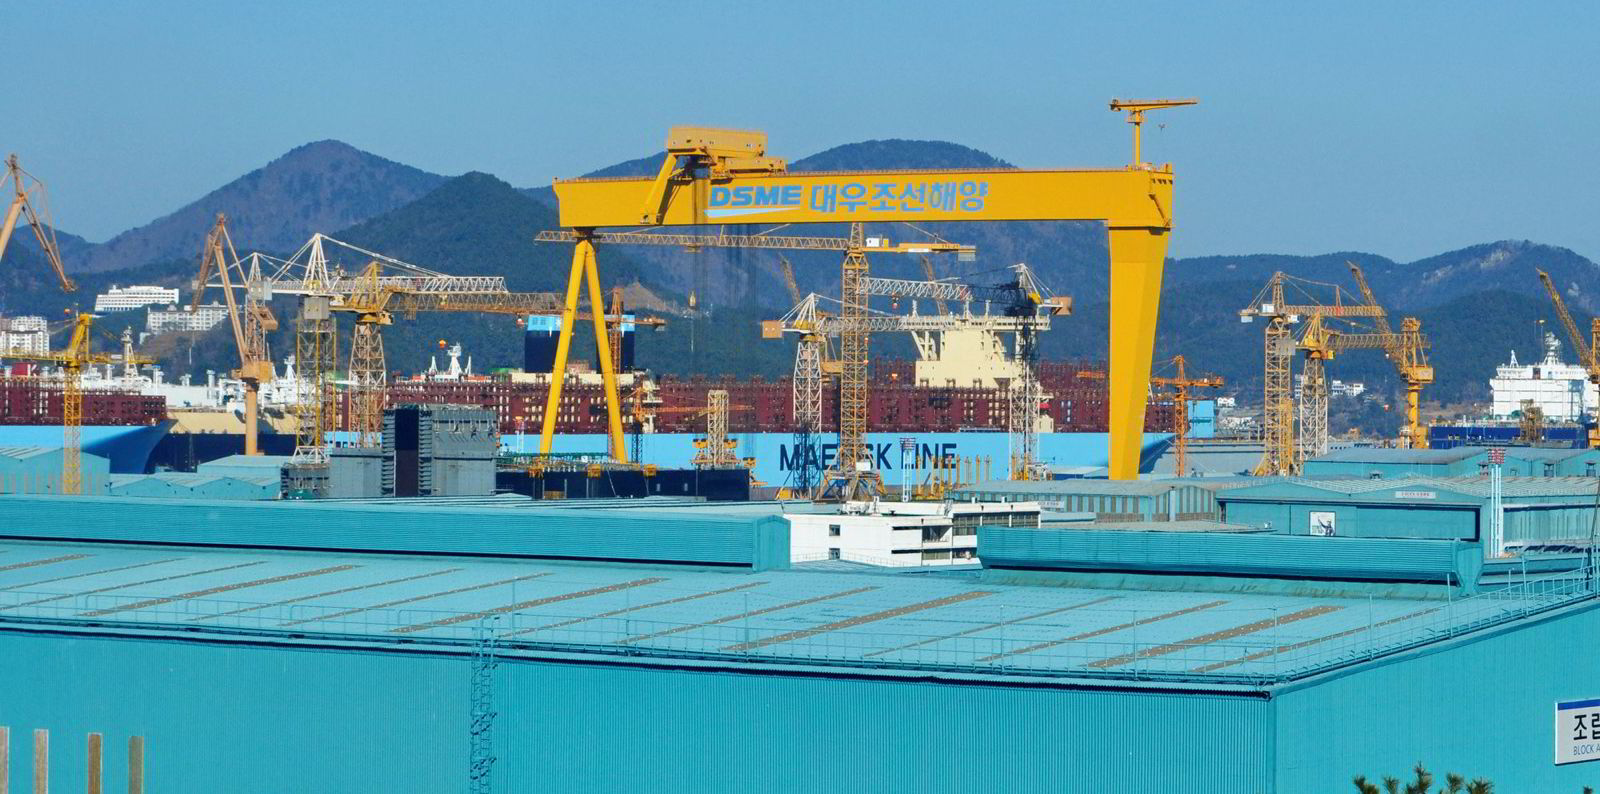 DSME officially renamed Hanwha Ocean as Kwon takes the helm | TradeWinds